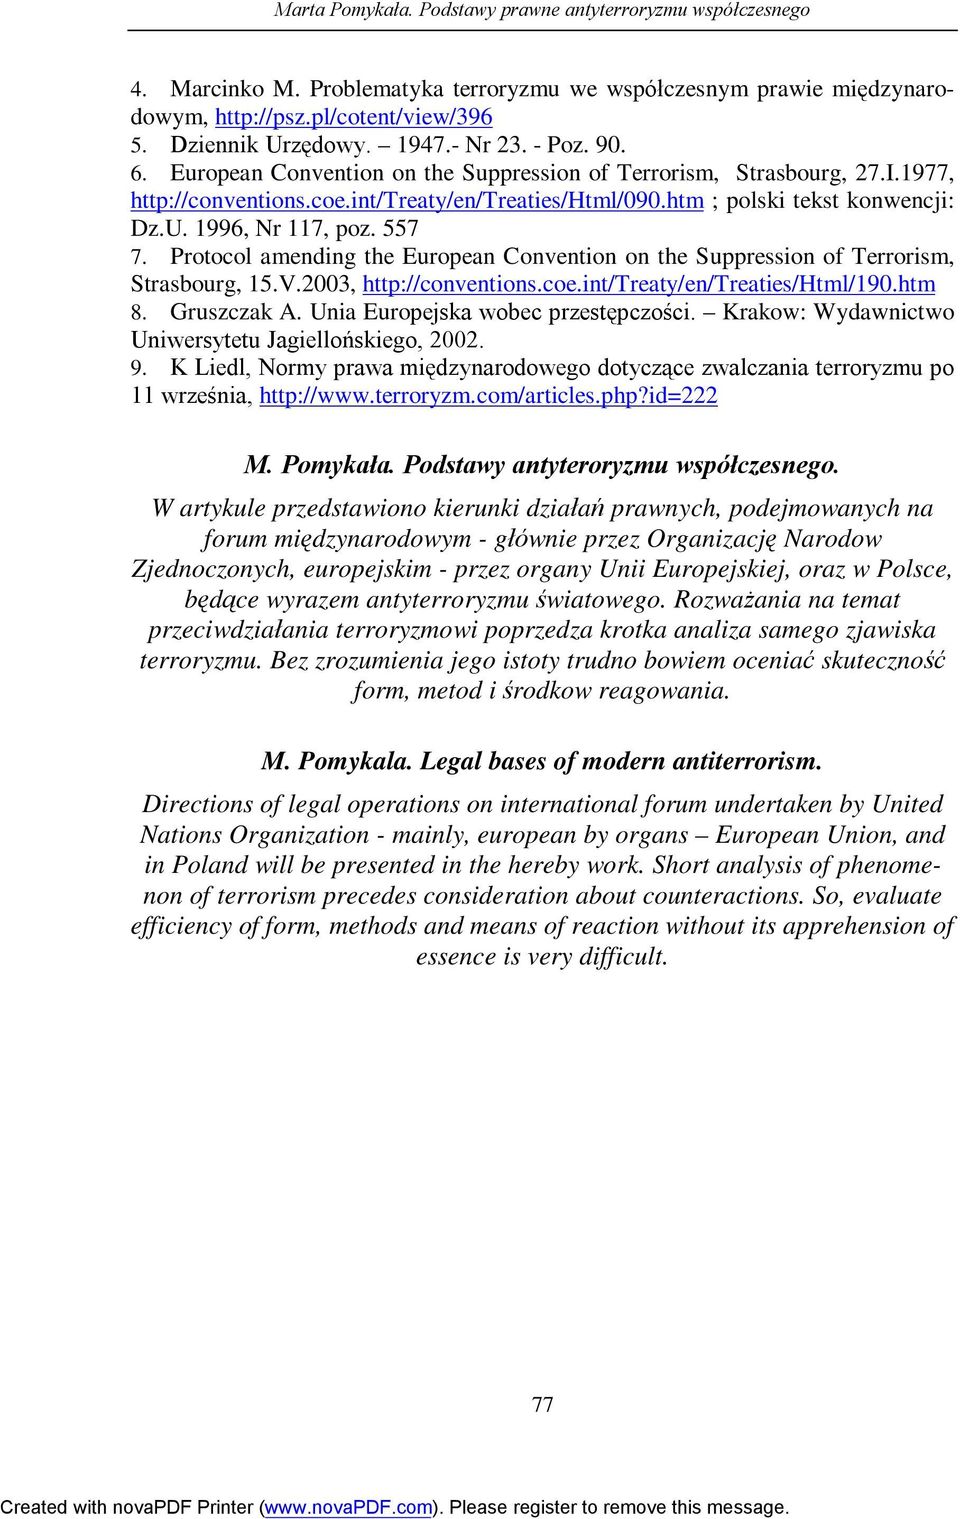 1996, Nr 117, poz. 557 7. Protocol amending the European Convention on the Suppression of Terrorism, Strasbourg, 15.V.2003, http://conventions.coe.int/treaty/en/treaties/html/190.htm 8. Gruszczak A.